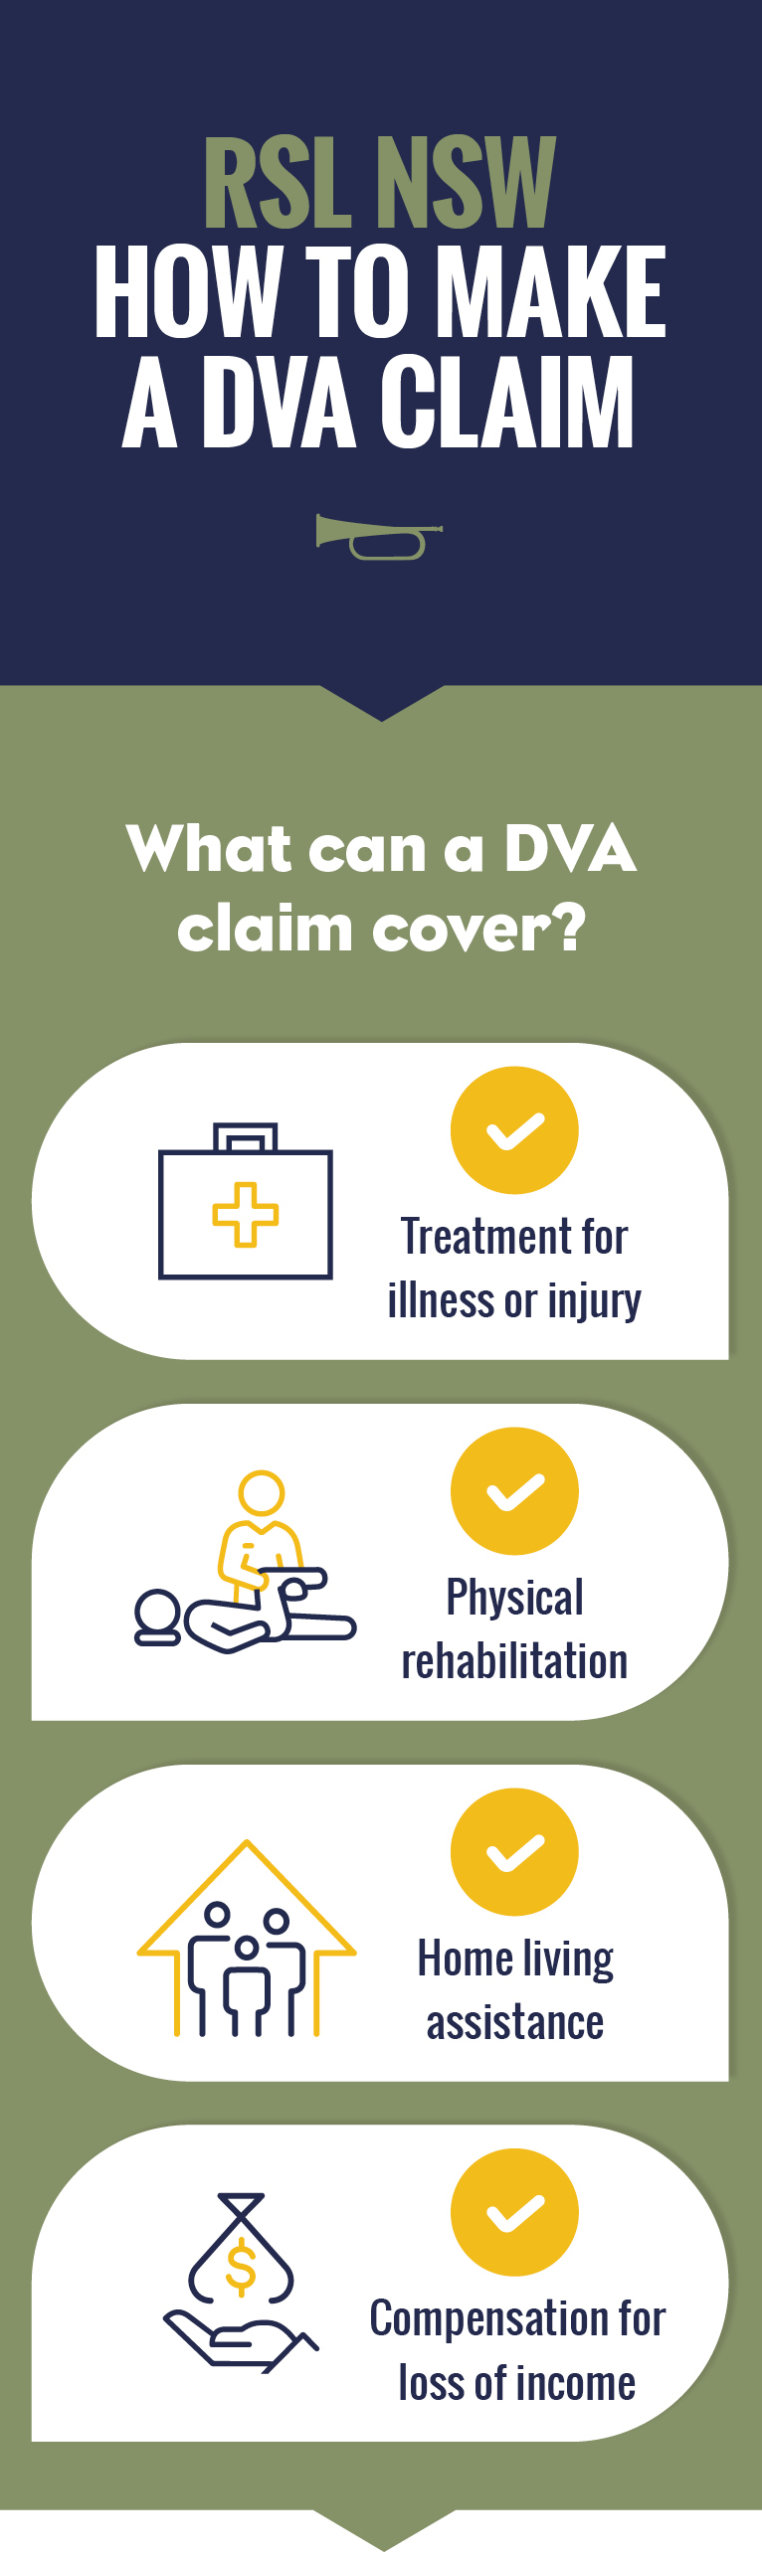 How to make a DVA claim, What can a DVA claim cover?: Treatment for illness or injury, Physical rehabilitation Home living assistance, Compensation for loss of income